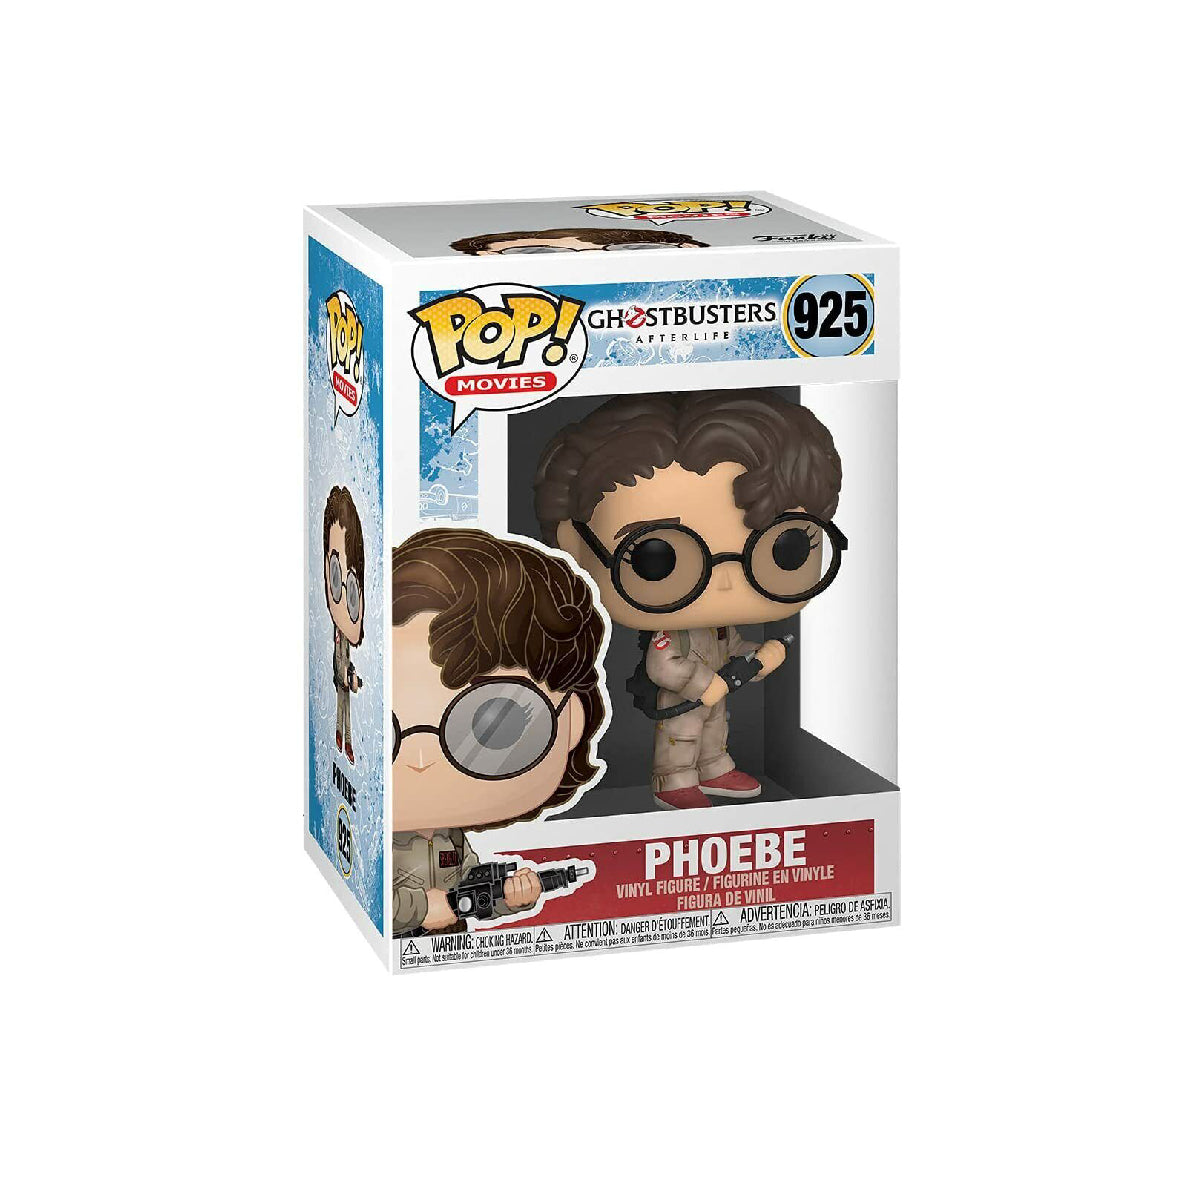 FUNKO POP MOVIES GHOSTBUSTERS AFTERLIFE PHOEBE 925